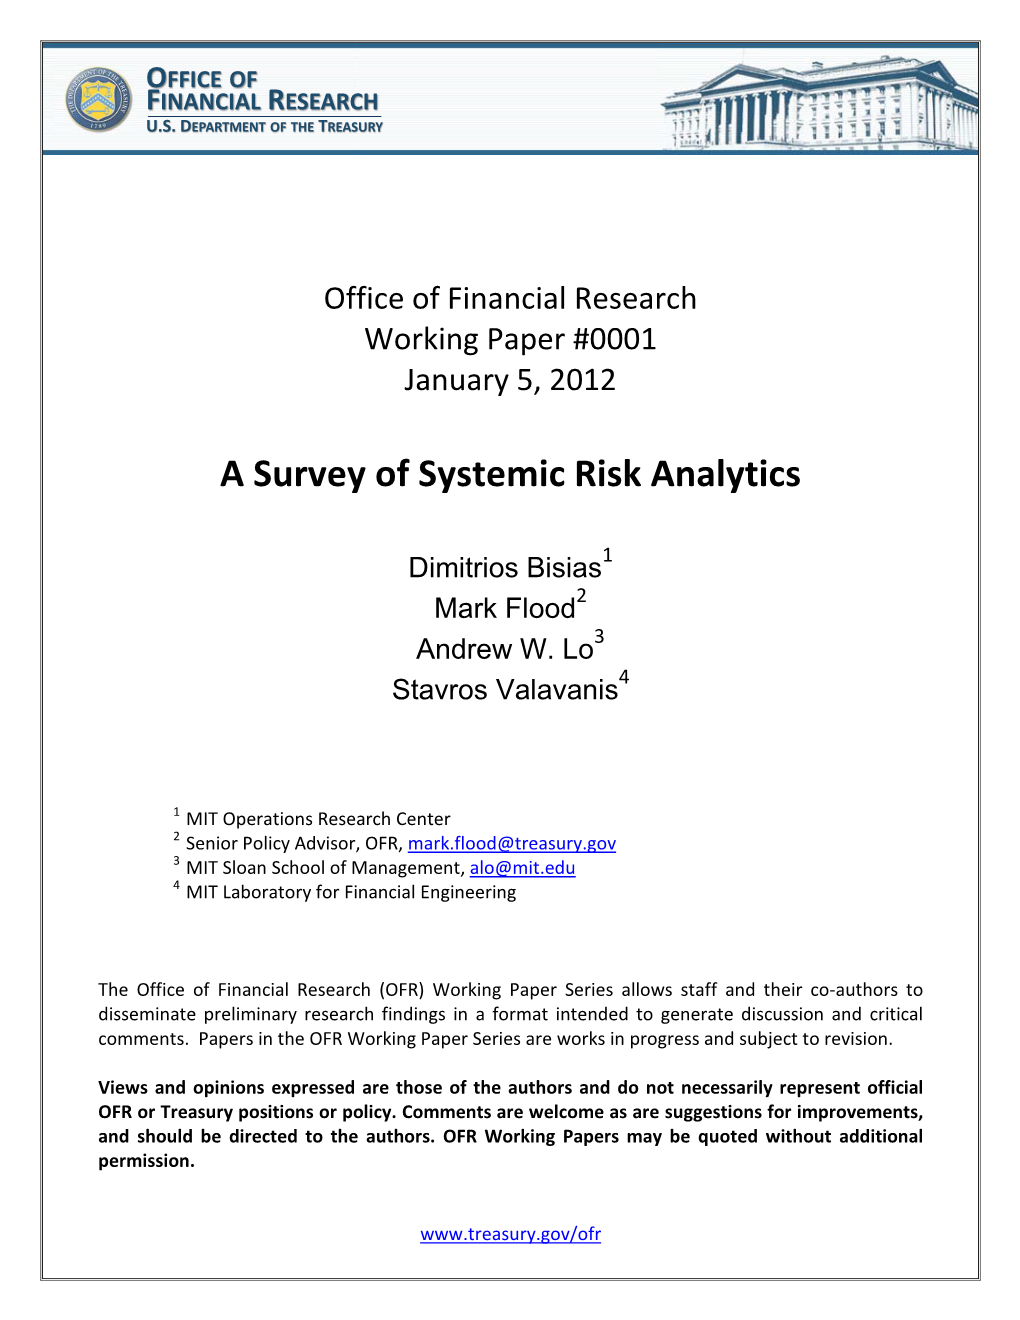 A Survey of Systemic Risk Analytics